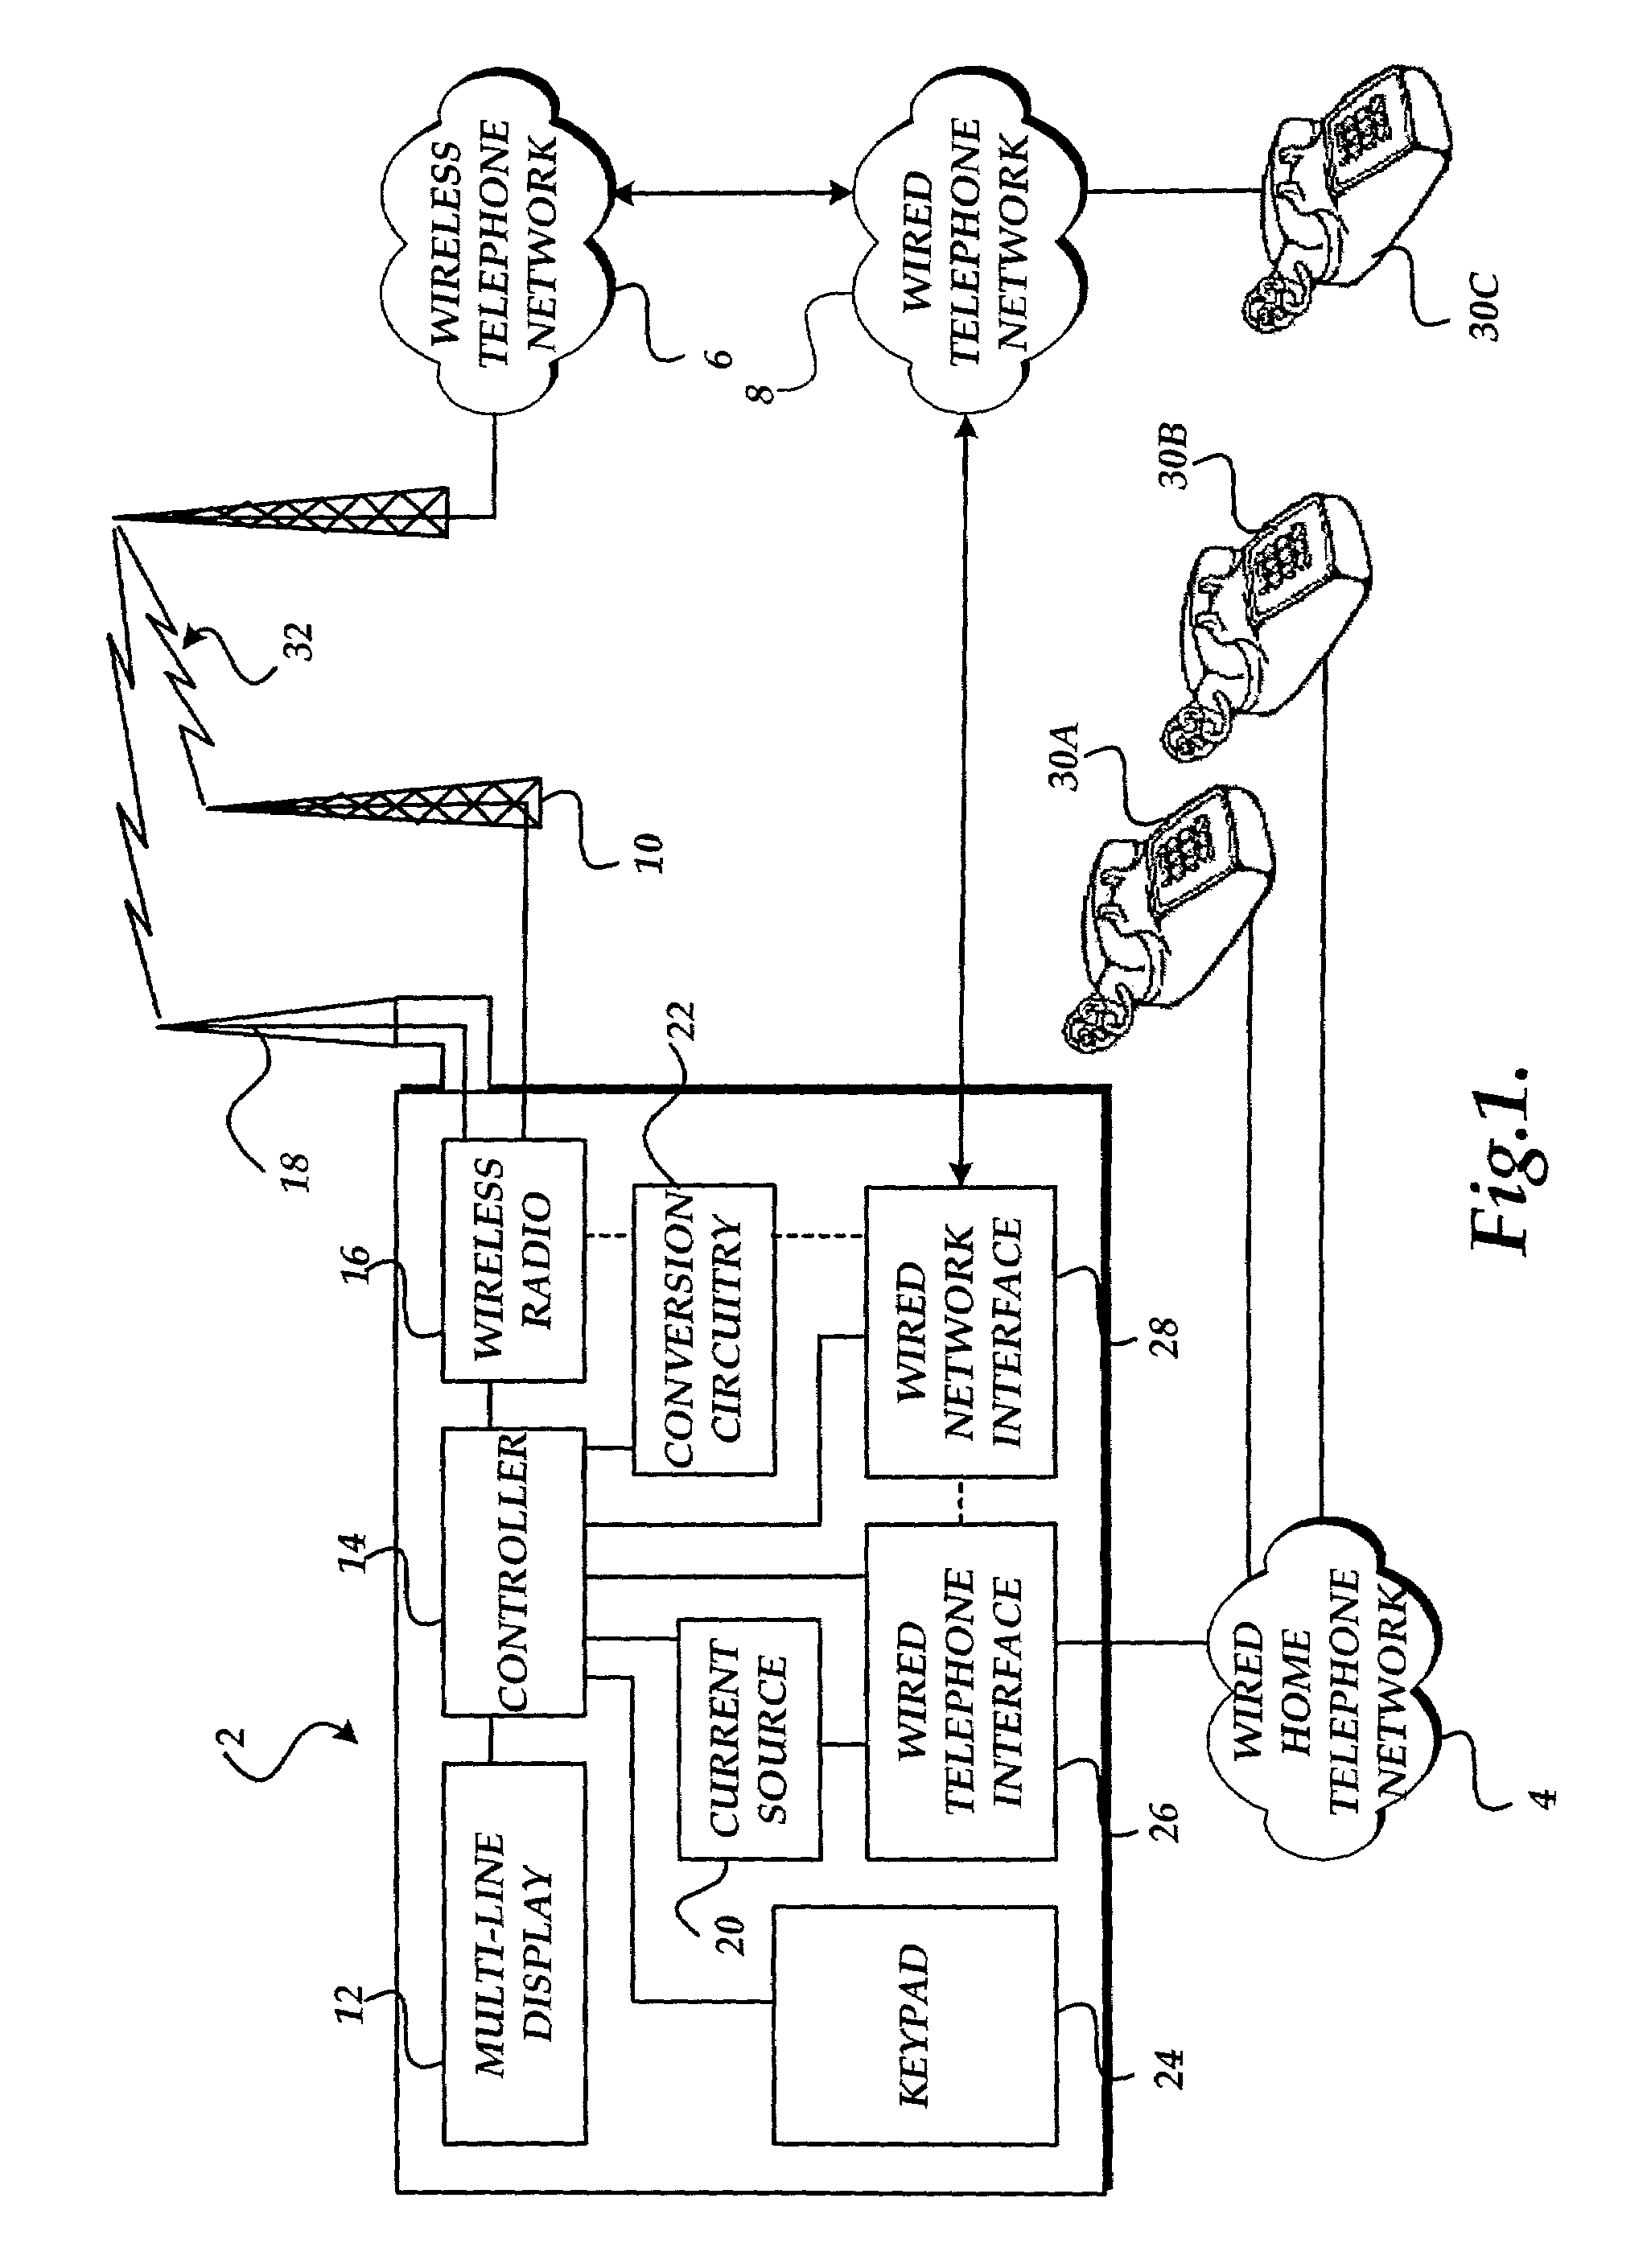 Apparatus for providing a gateway between a wired telephone and a wireless telephone network